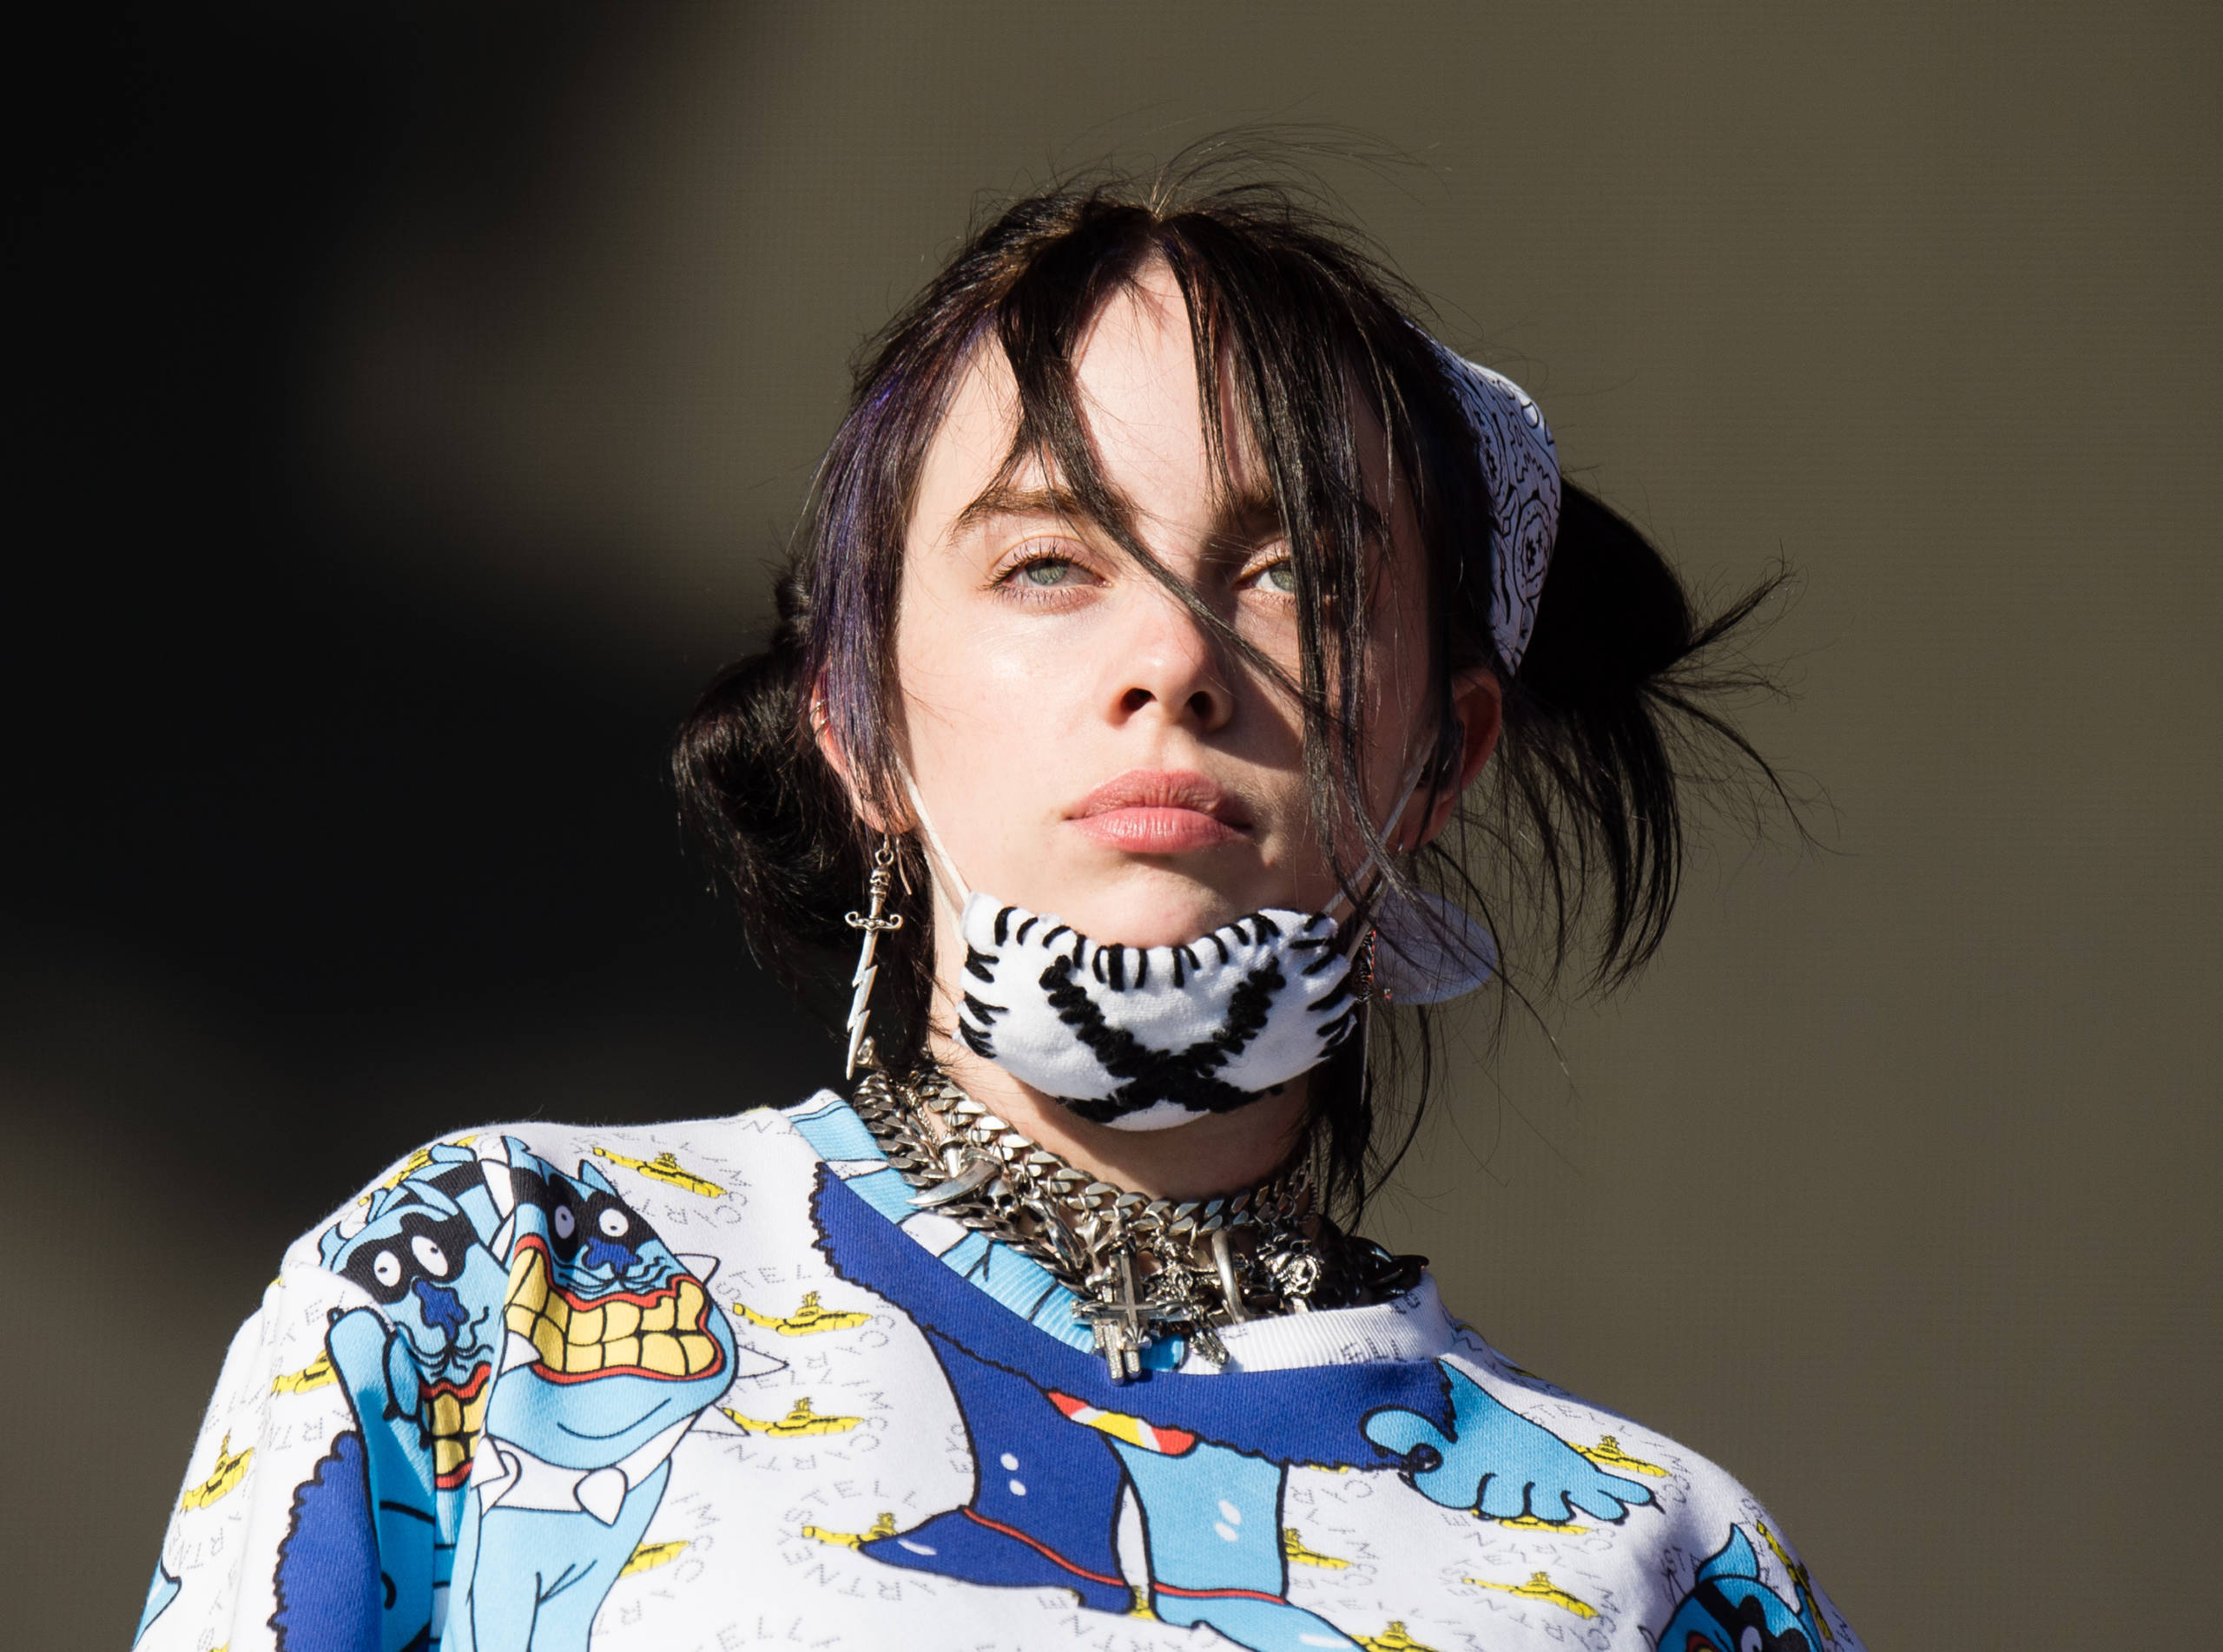 Billie Eilish's blue hair and outfit at the 2019 Glastonbury Festival - wide 3